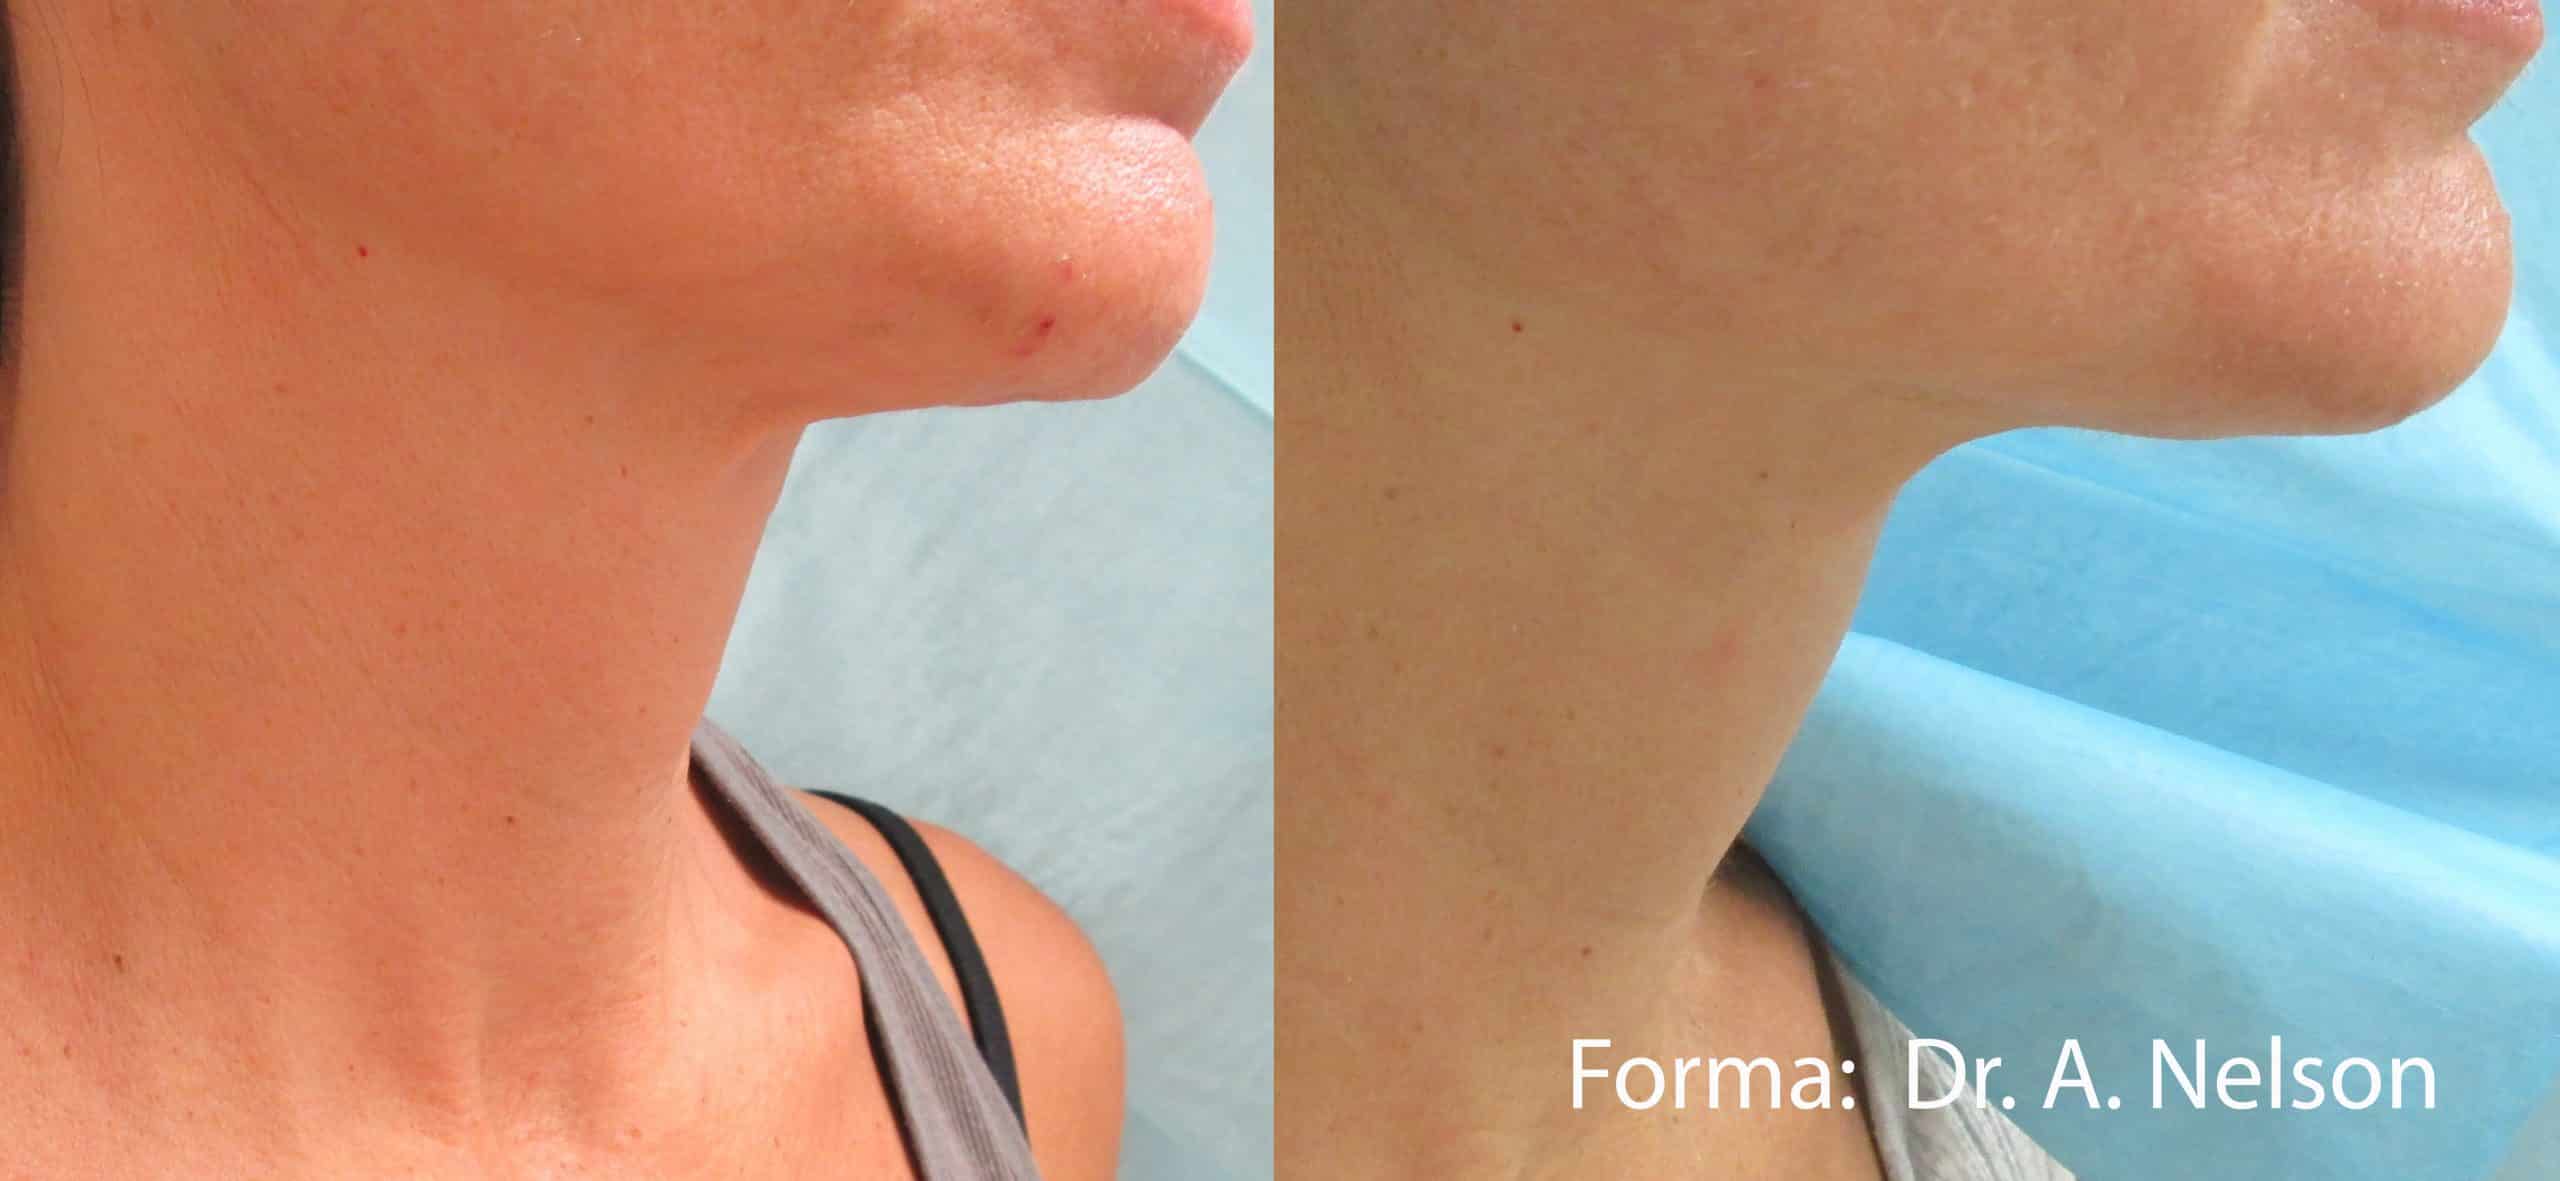 forma-before-after-dr-a-nelson-preview-5